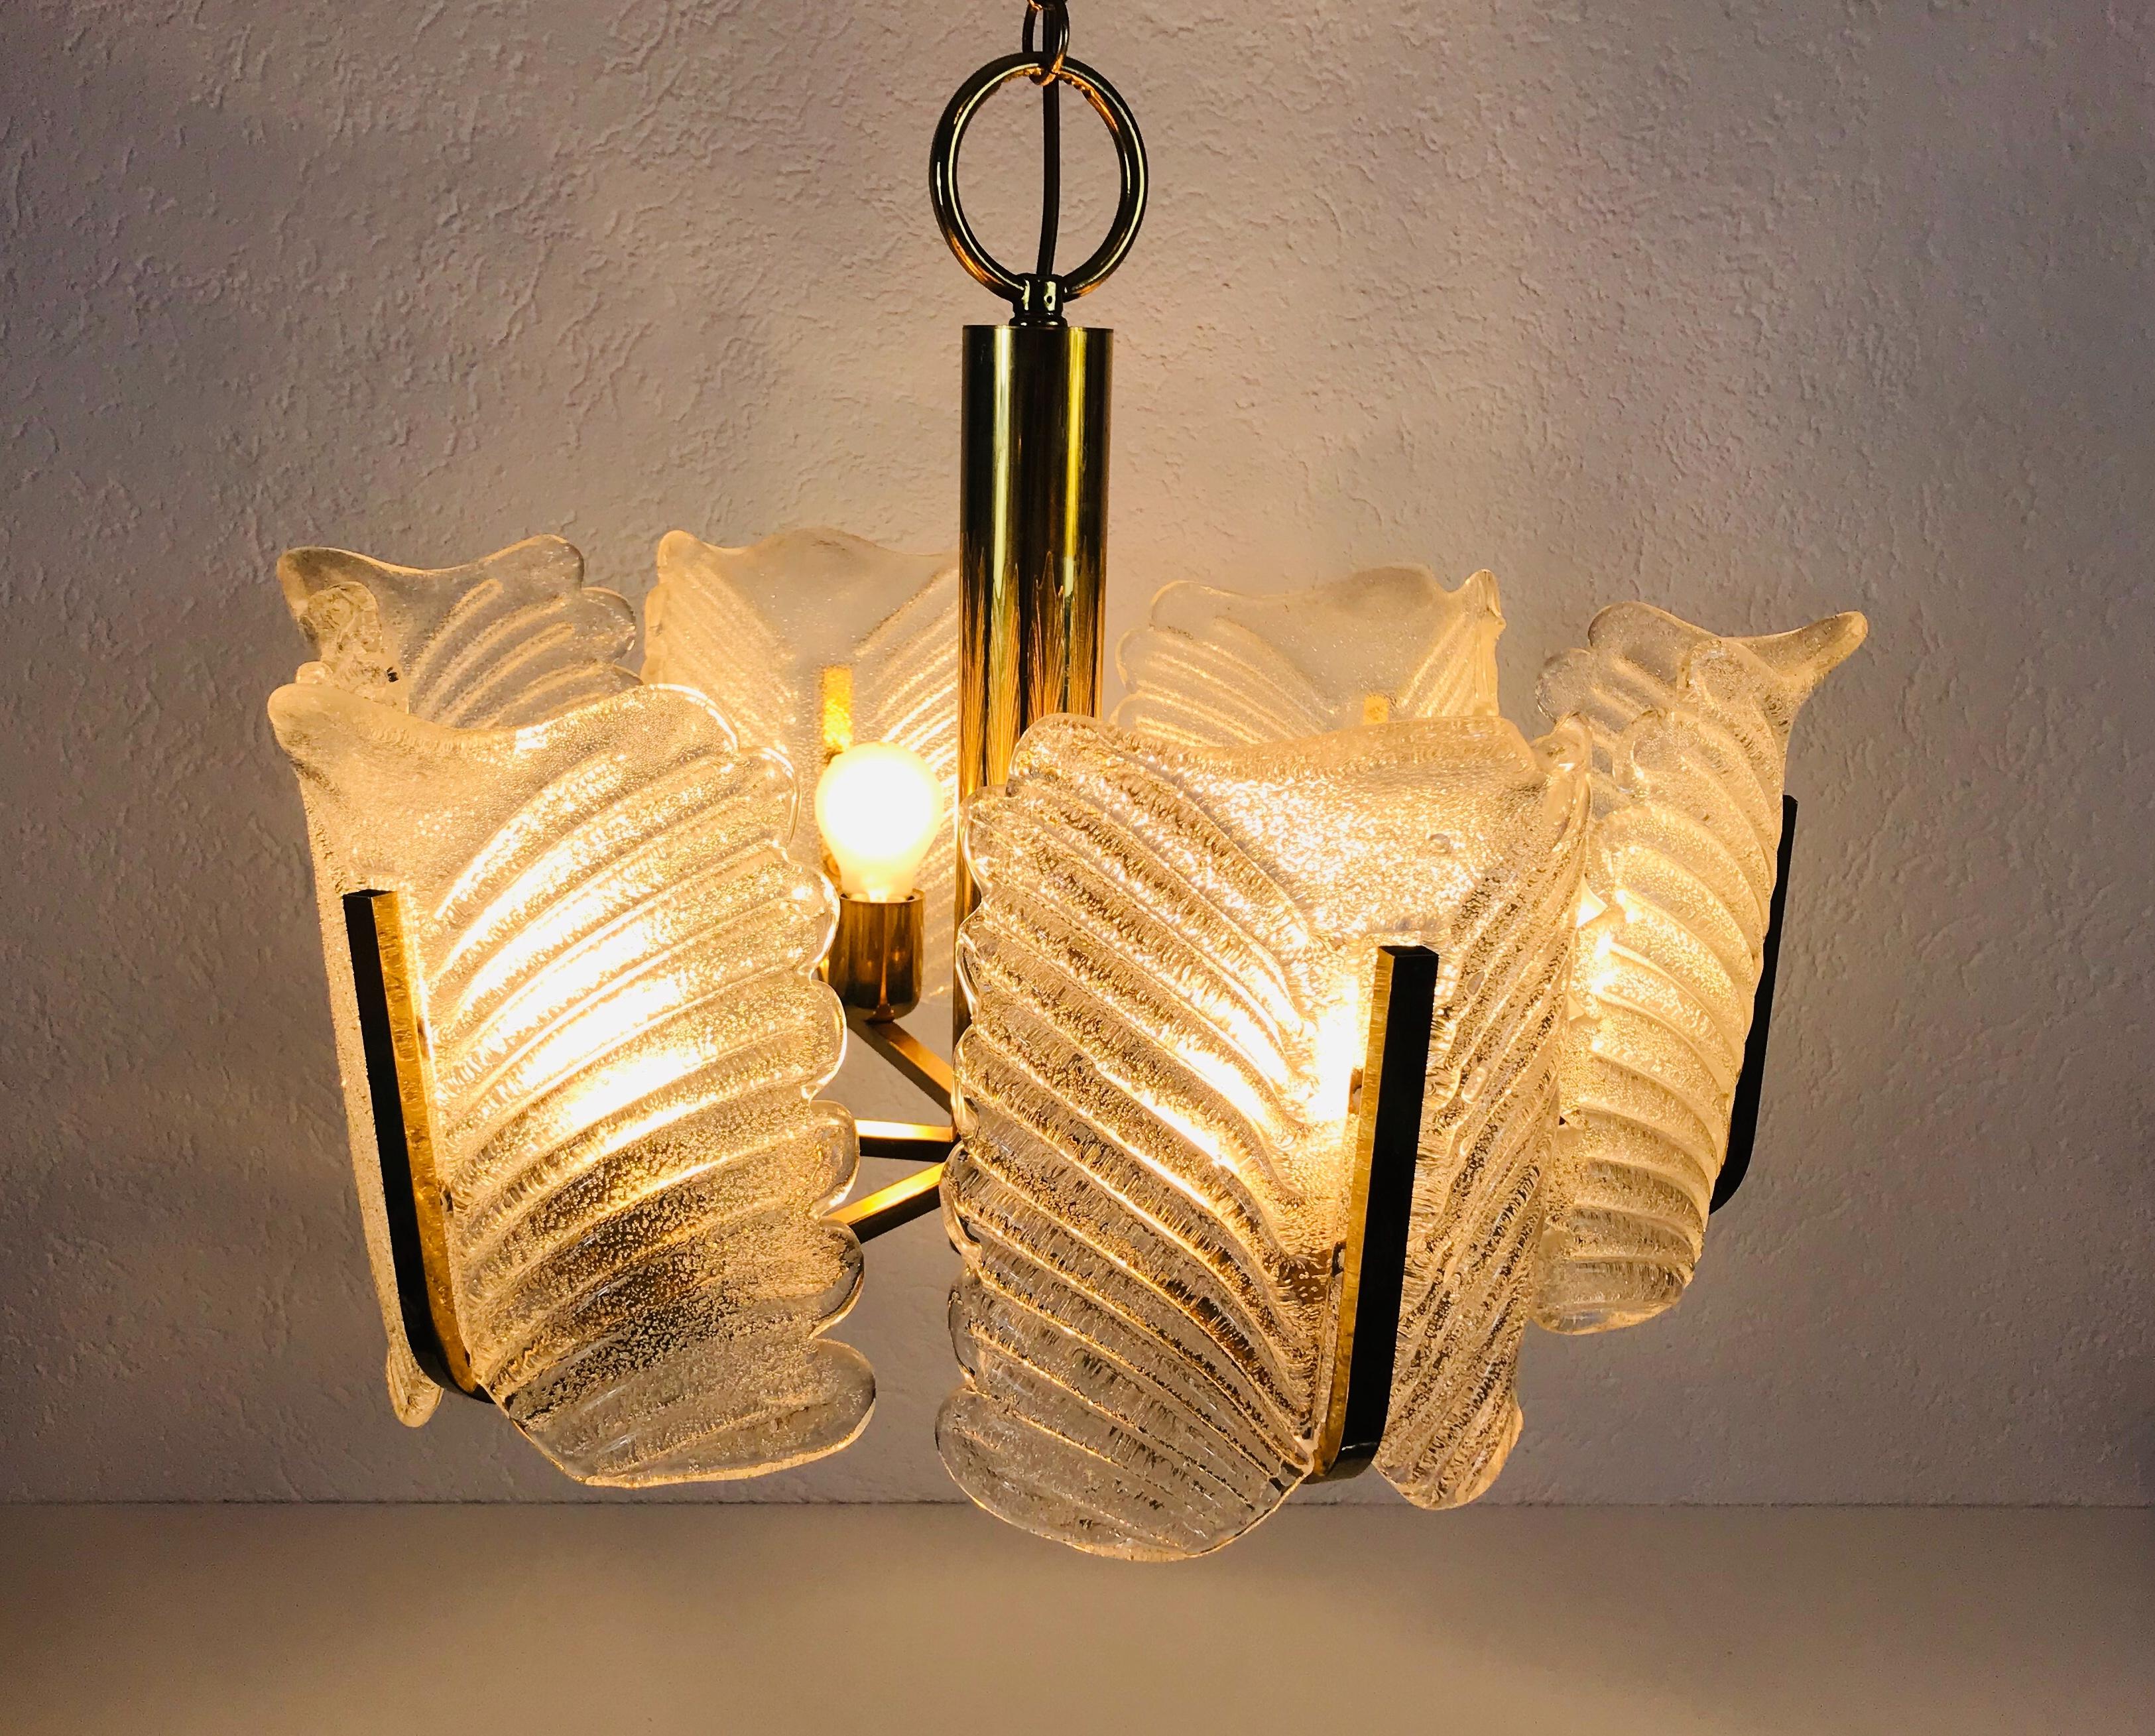 Mid-Century Modern brass chandelier made in the 1960s. It has brass arms, each with an ice glass shade in extraordinary shape. 

The light requires eight E14 light bulbs.